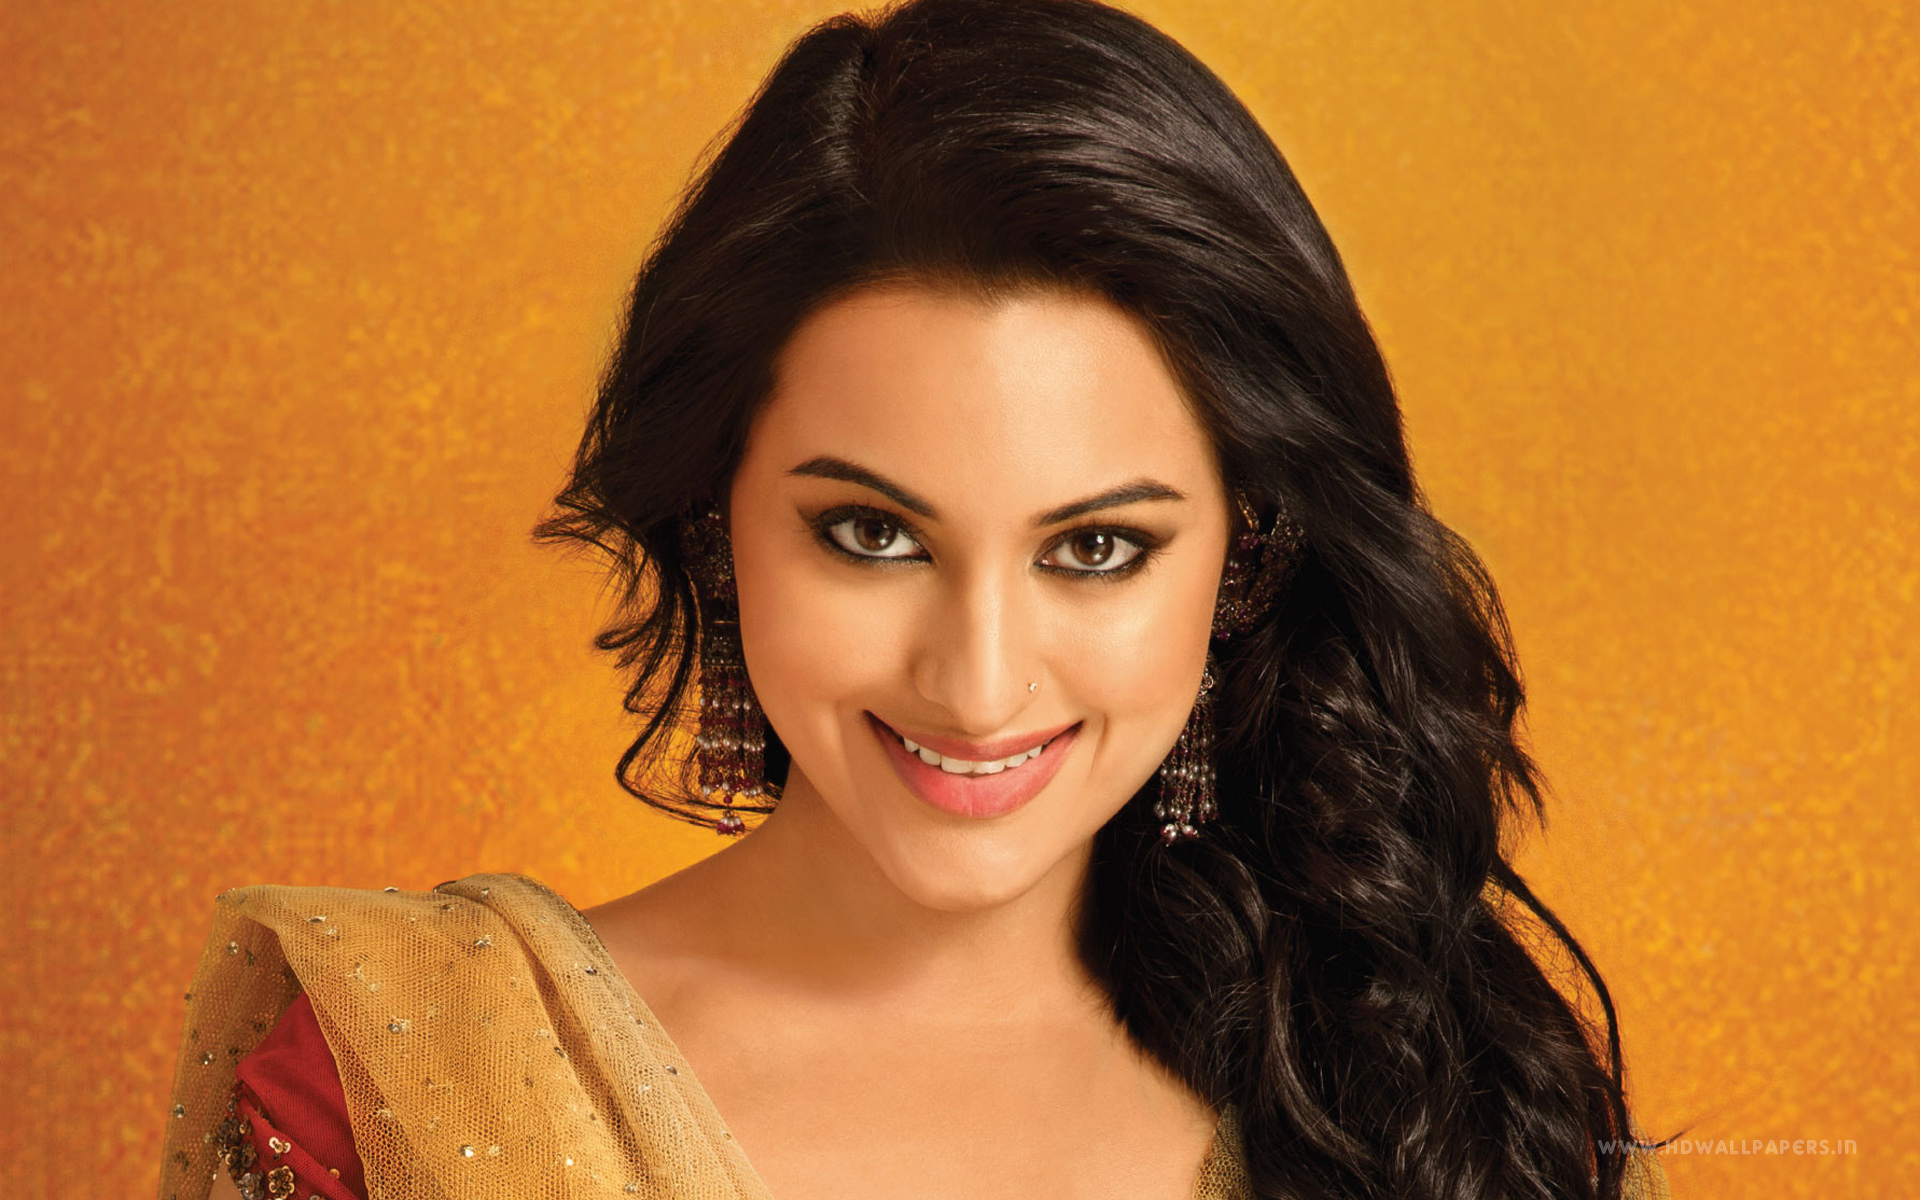 Sonakshi Sinha Xxx Wallpaper - Page 2 of Sonakshi 4K wallpapers for your desktop or mobile screen